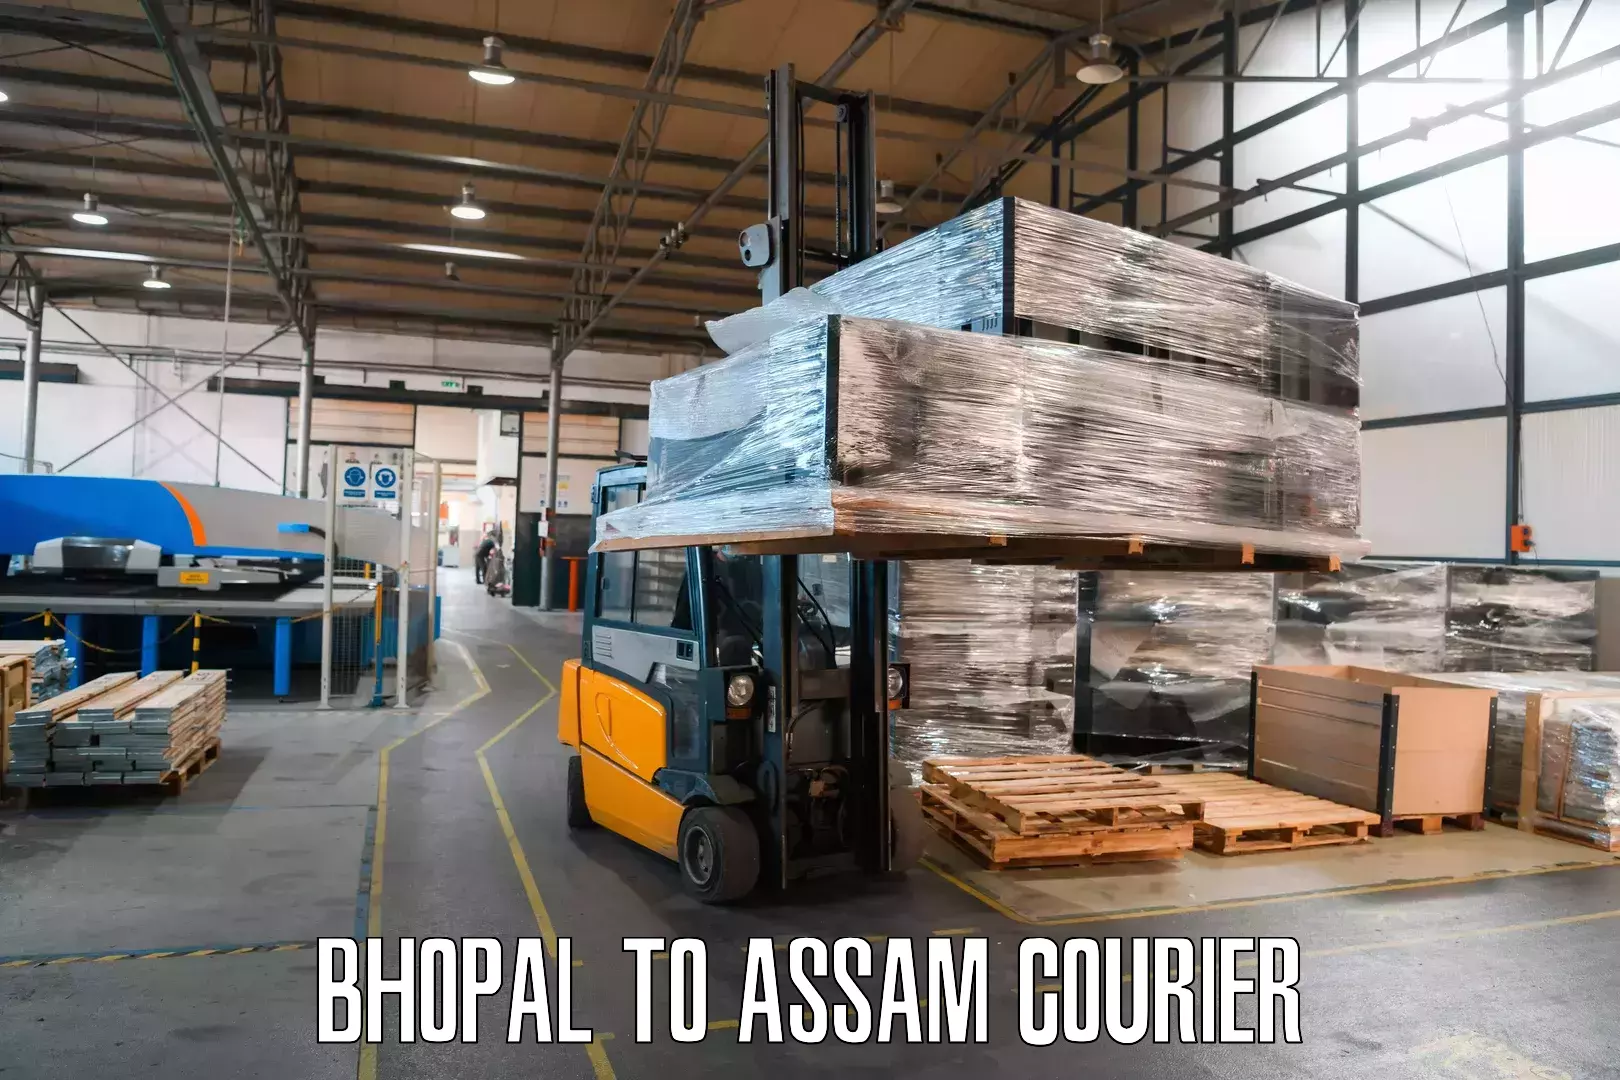 Global shipping networks Bhopal to Dhemaji